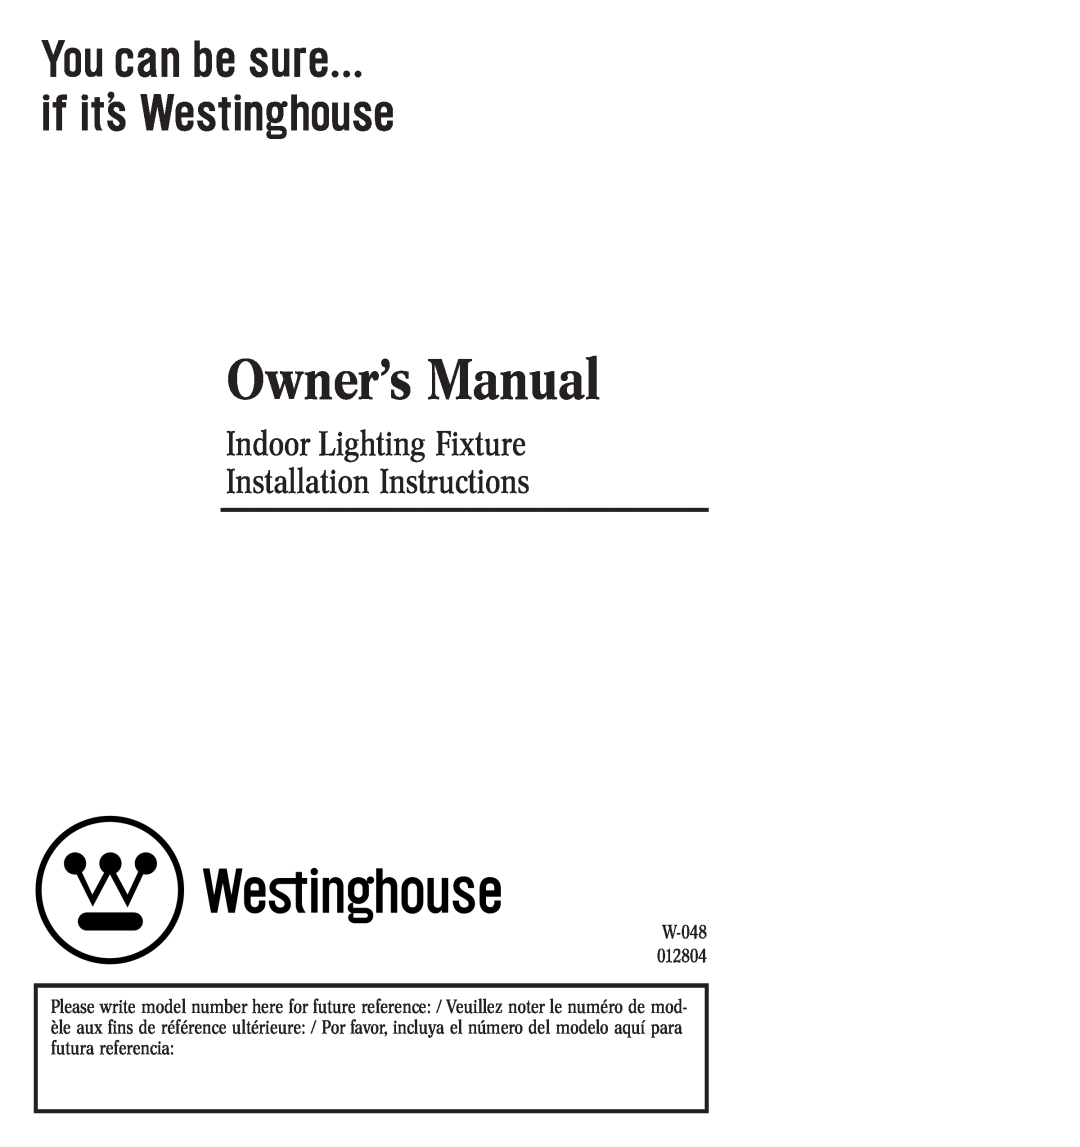 Westinghouse 12804 owner manual Indoor Lighting Fixture Installation Instructions 